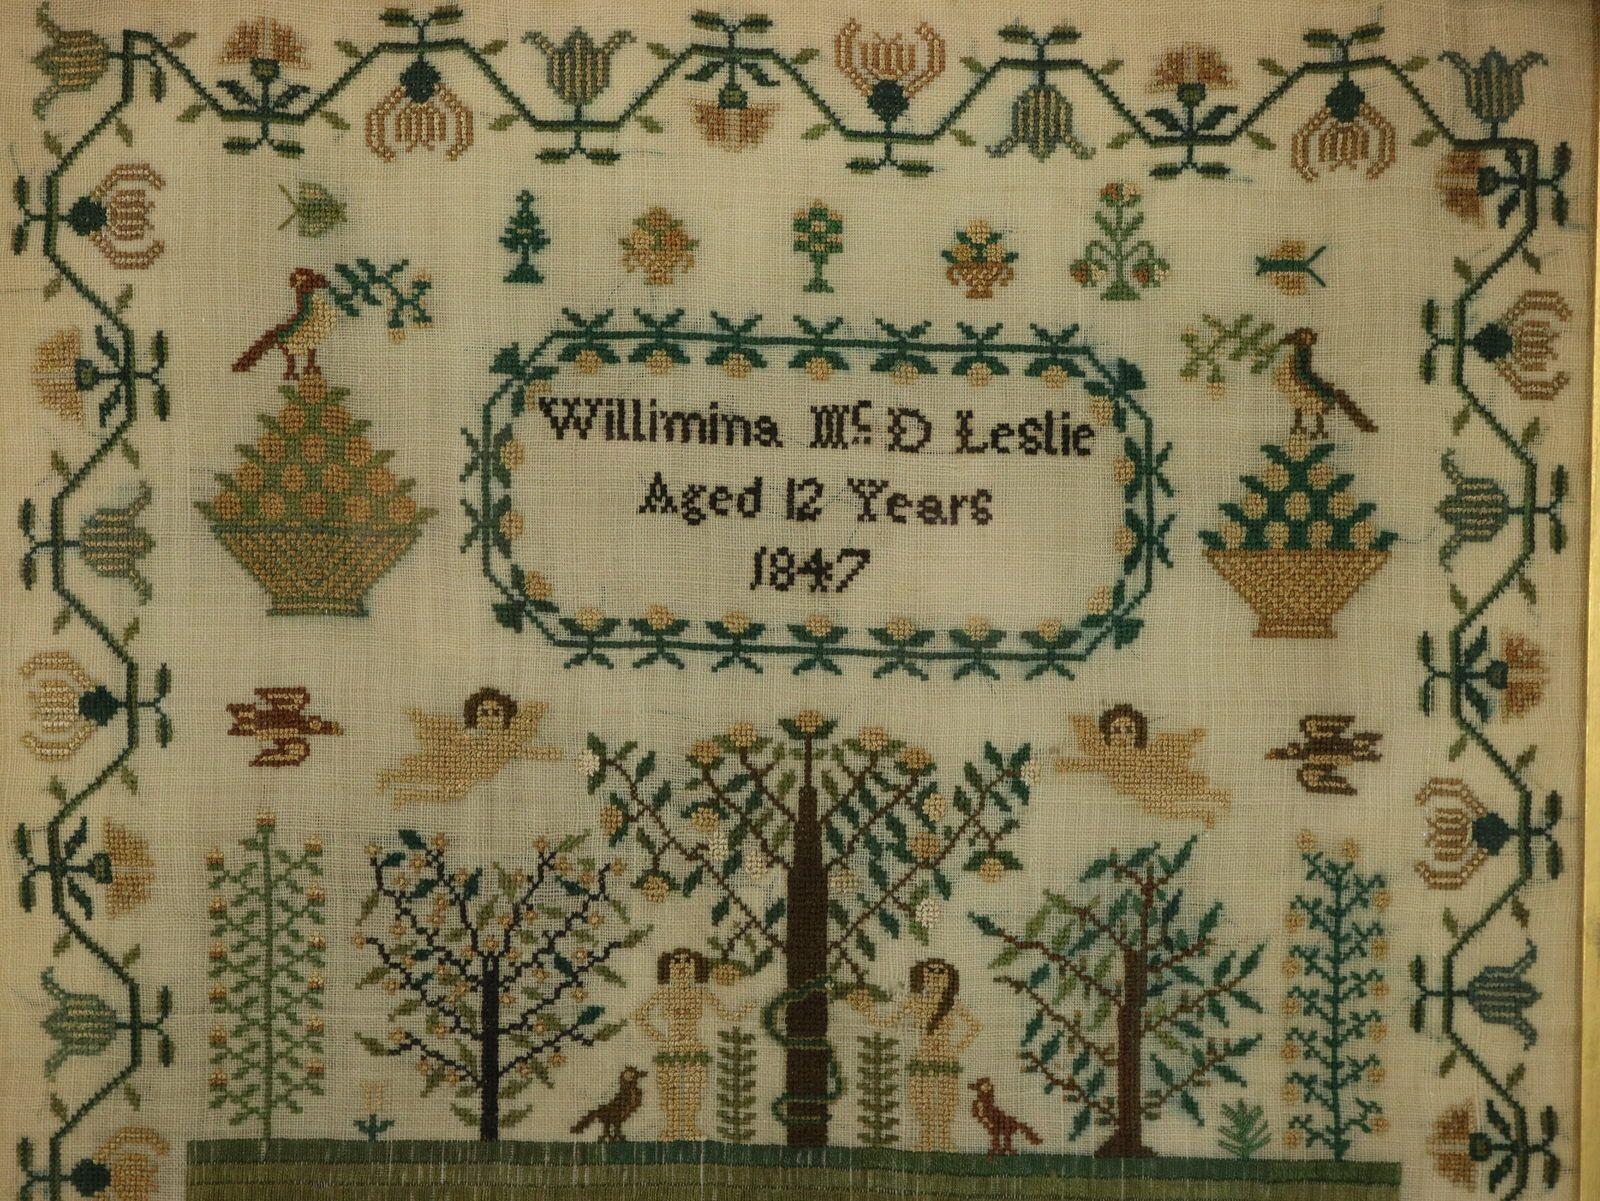 1847 Victorian period Sampler by Willimina McD Leslie Aged 12. The sampler is worked in silk on linen ground, in a variety of stitches. Meandering floral border. Colours green, light brown, dark brown, gold and silver. Signed and dated 'Willimina